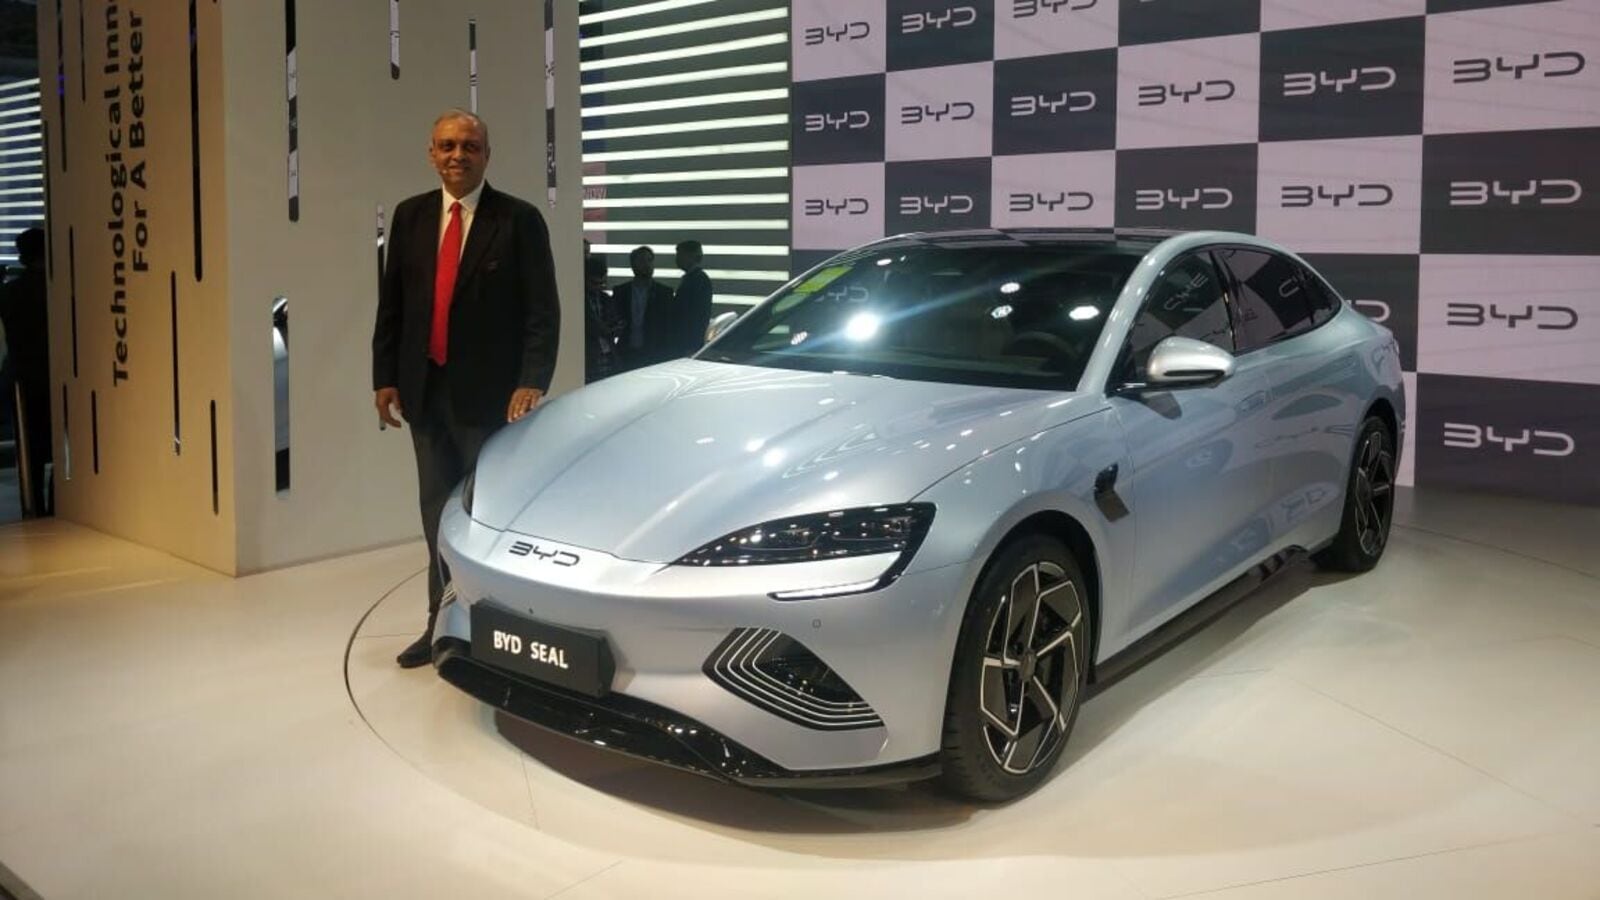 Auto Expo 2023 Five electric cars that light up India Motor Show